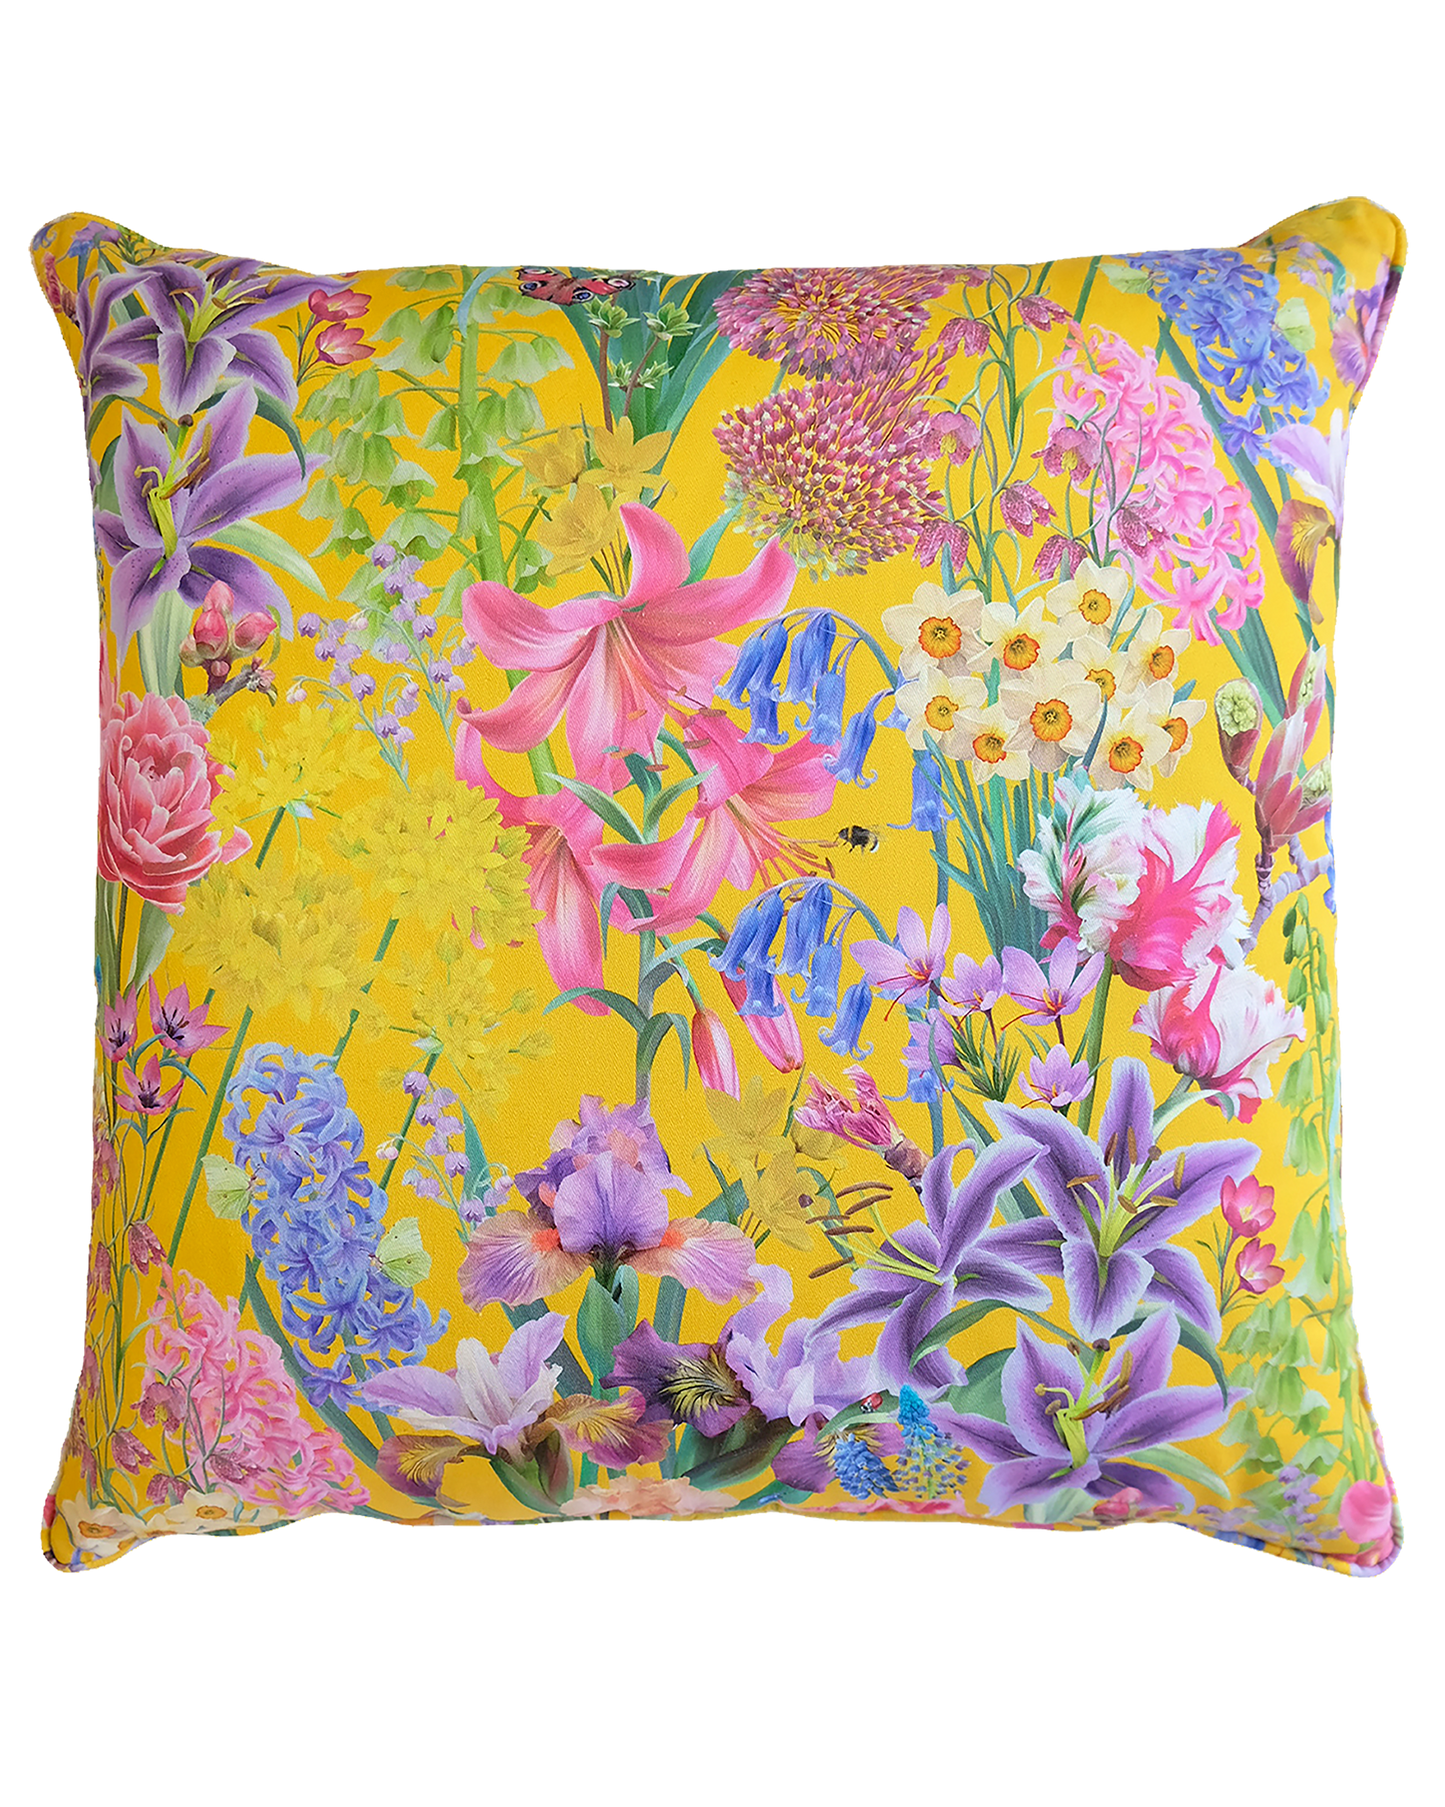 Sunshine yellow eco friendly nature inspired pattern stylish scatter cushions for colourful traditional interior design.